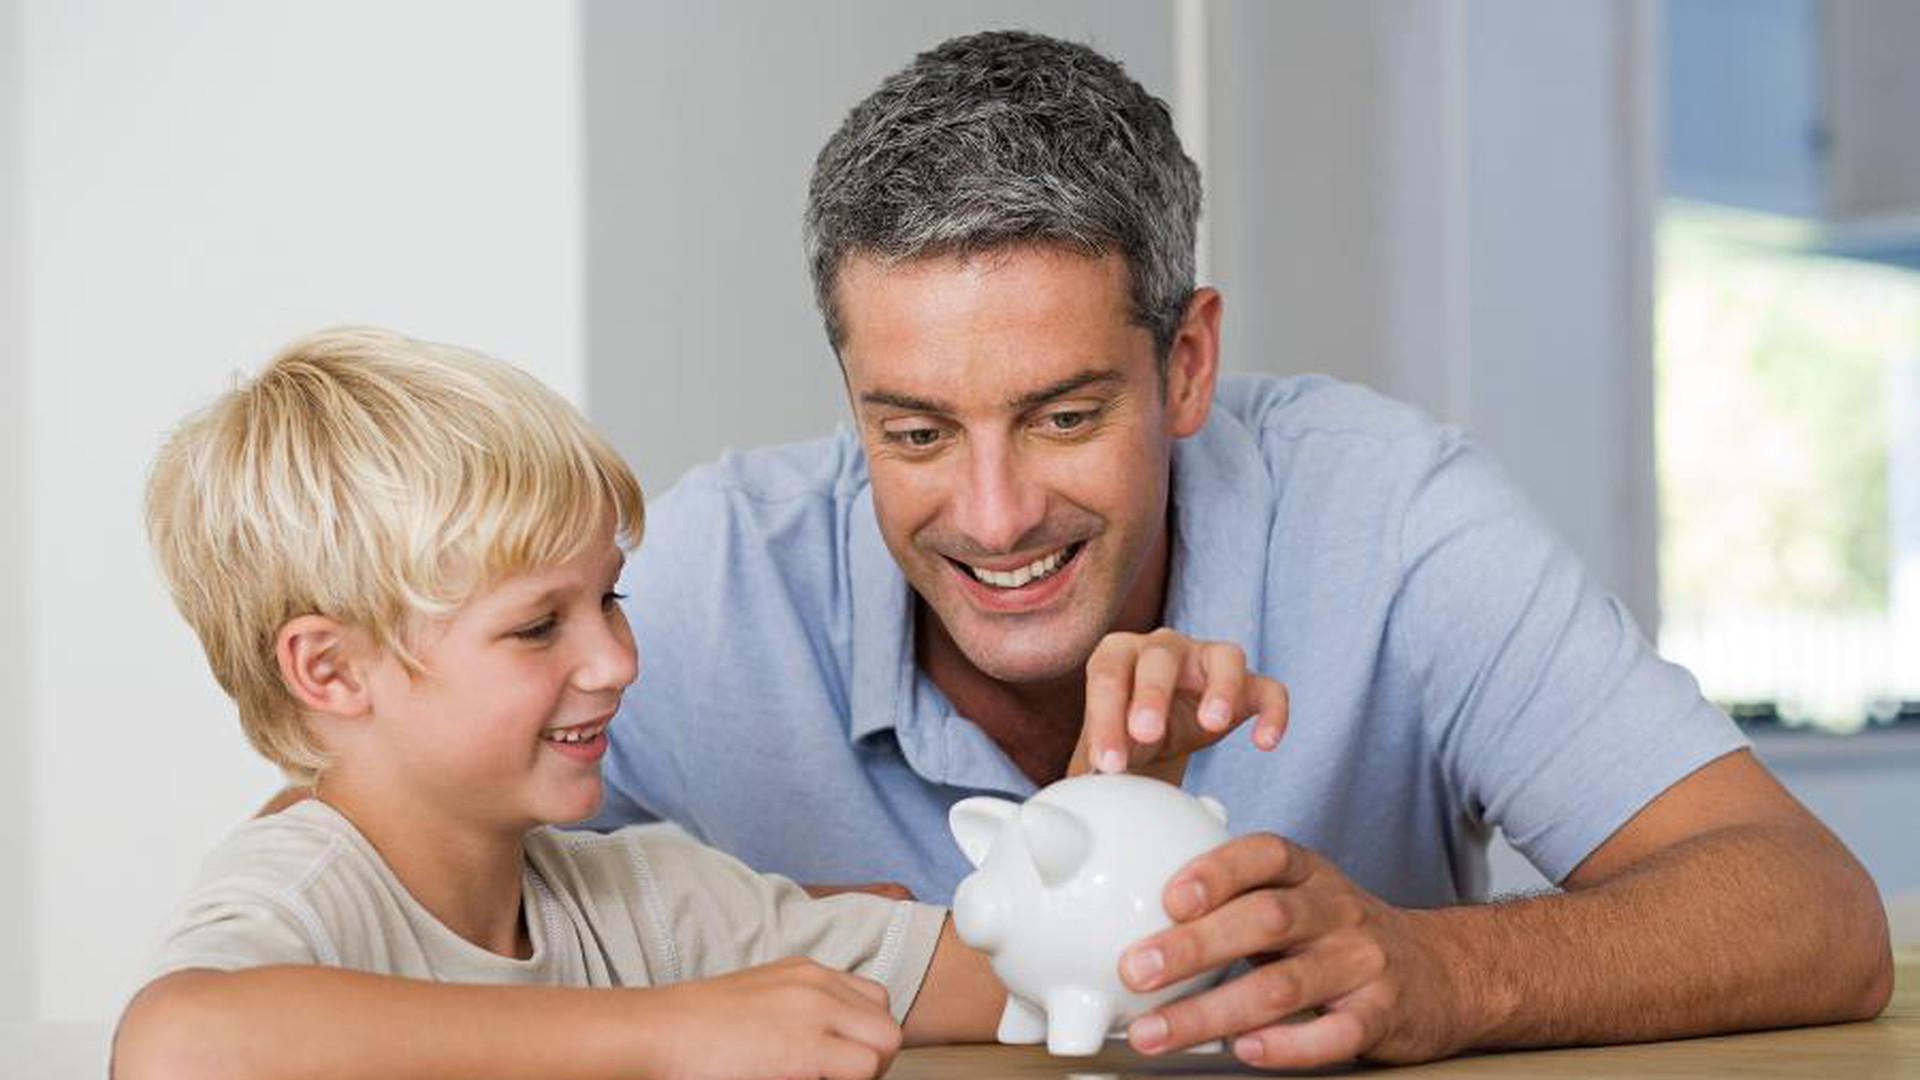 Teach Kids About Money While You’re Stuck At Home